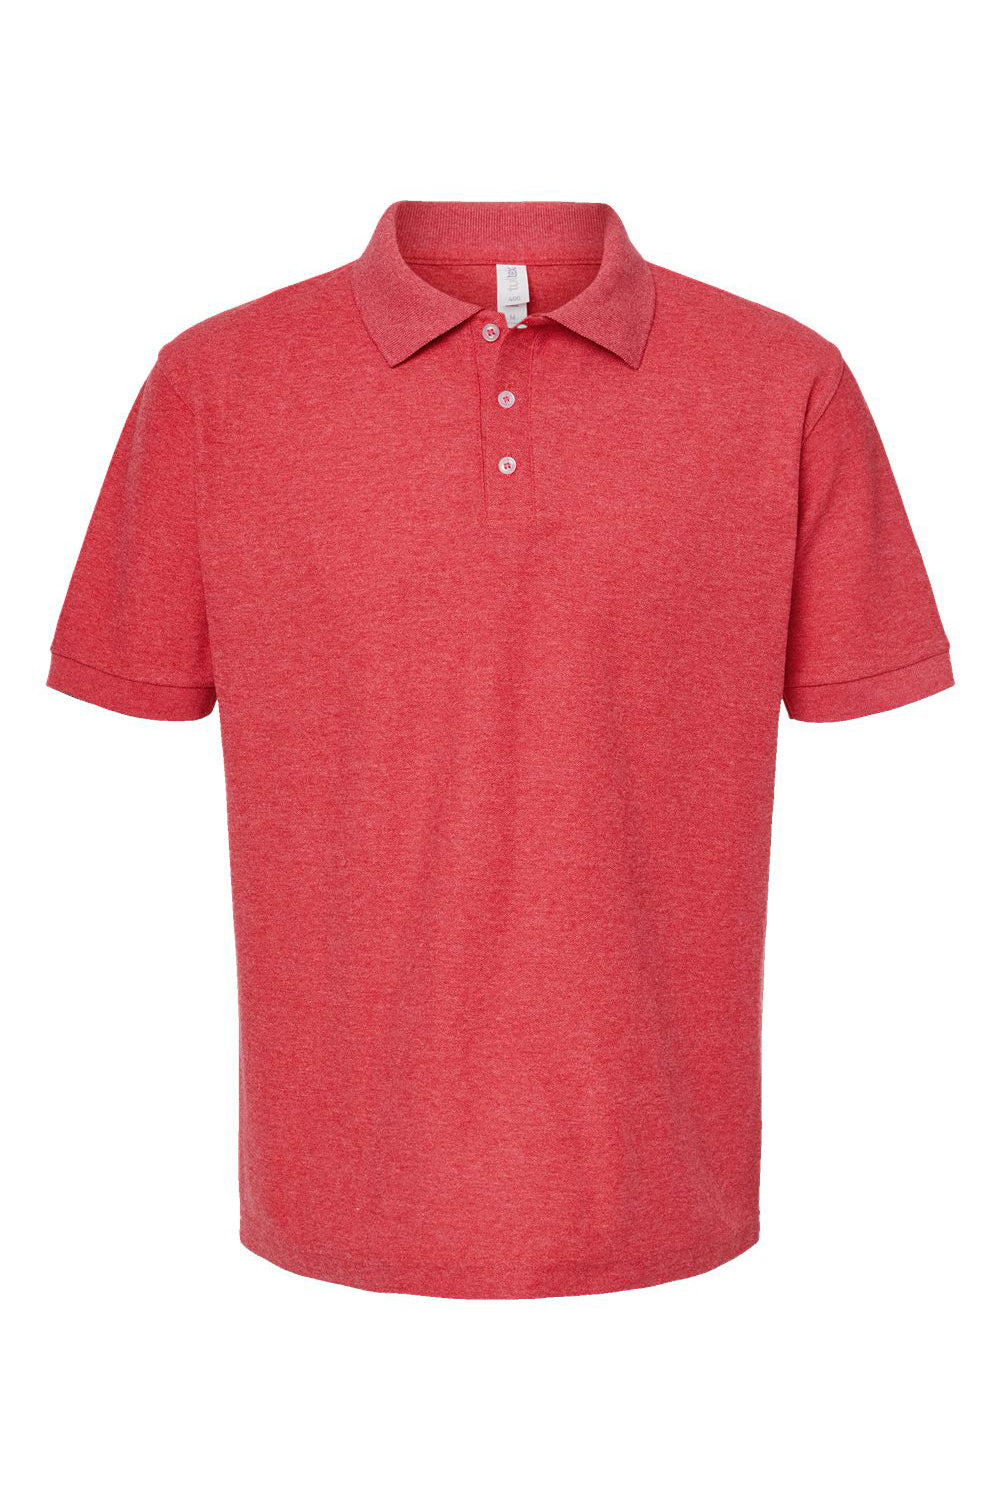 Tultex 400 Mens Sport Shirt Sleeve Polo Shirt Heather Red Flat Front